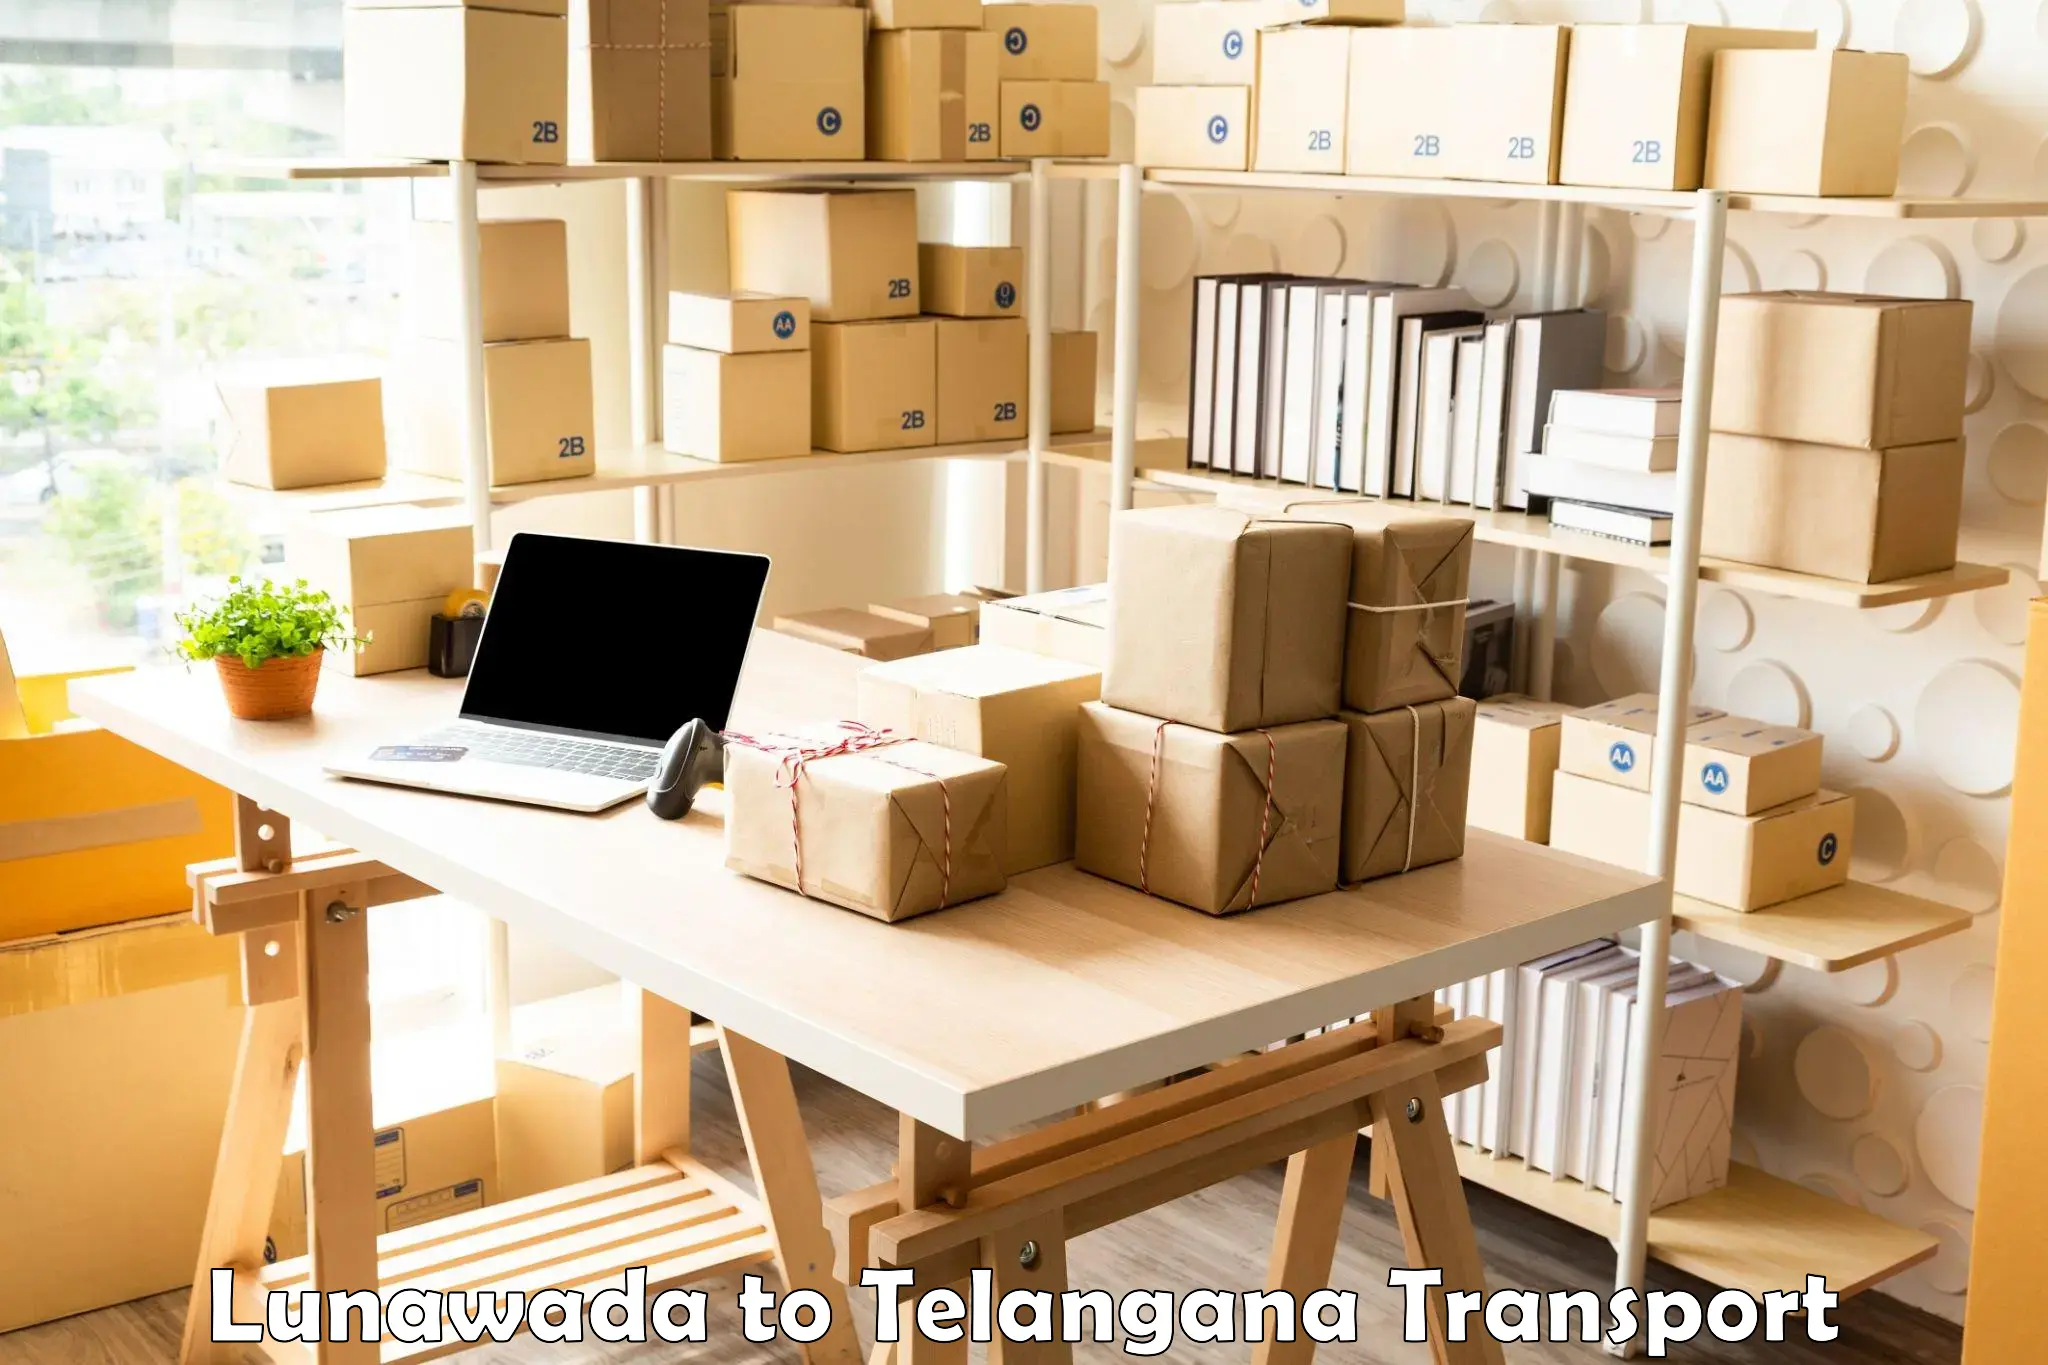 Lorry transport service in Lunawada to University of Hyderabad